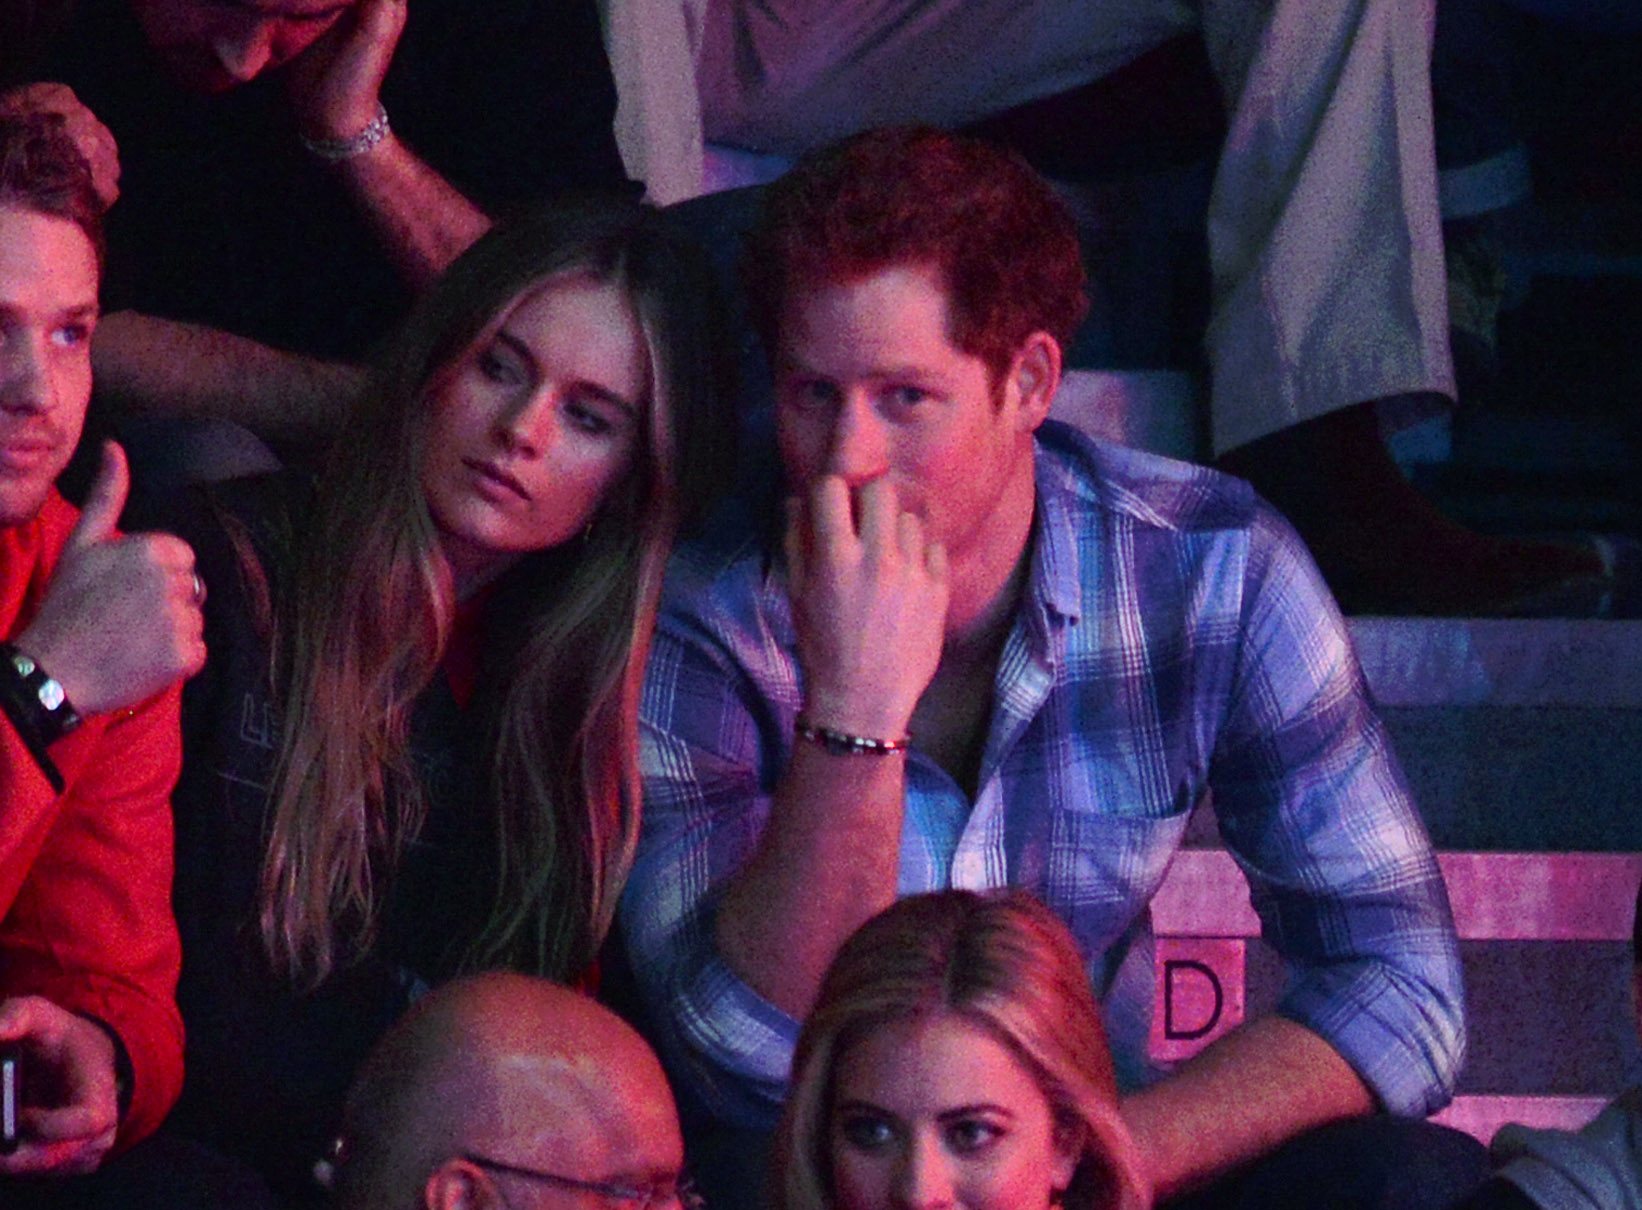 Cressida Bonas and Prince Harry attend We Day UK, a charity event to bring young people together at Wembley Arena in London, England, on March 7, 2014. | Source: Getty Images